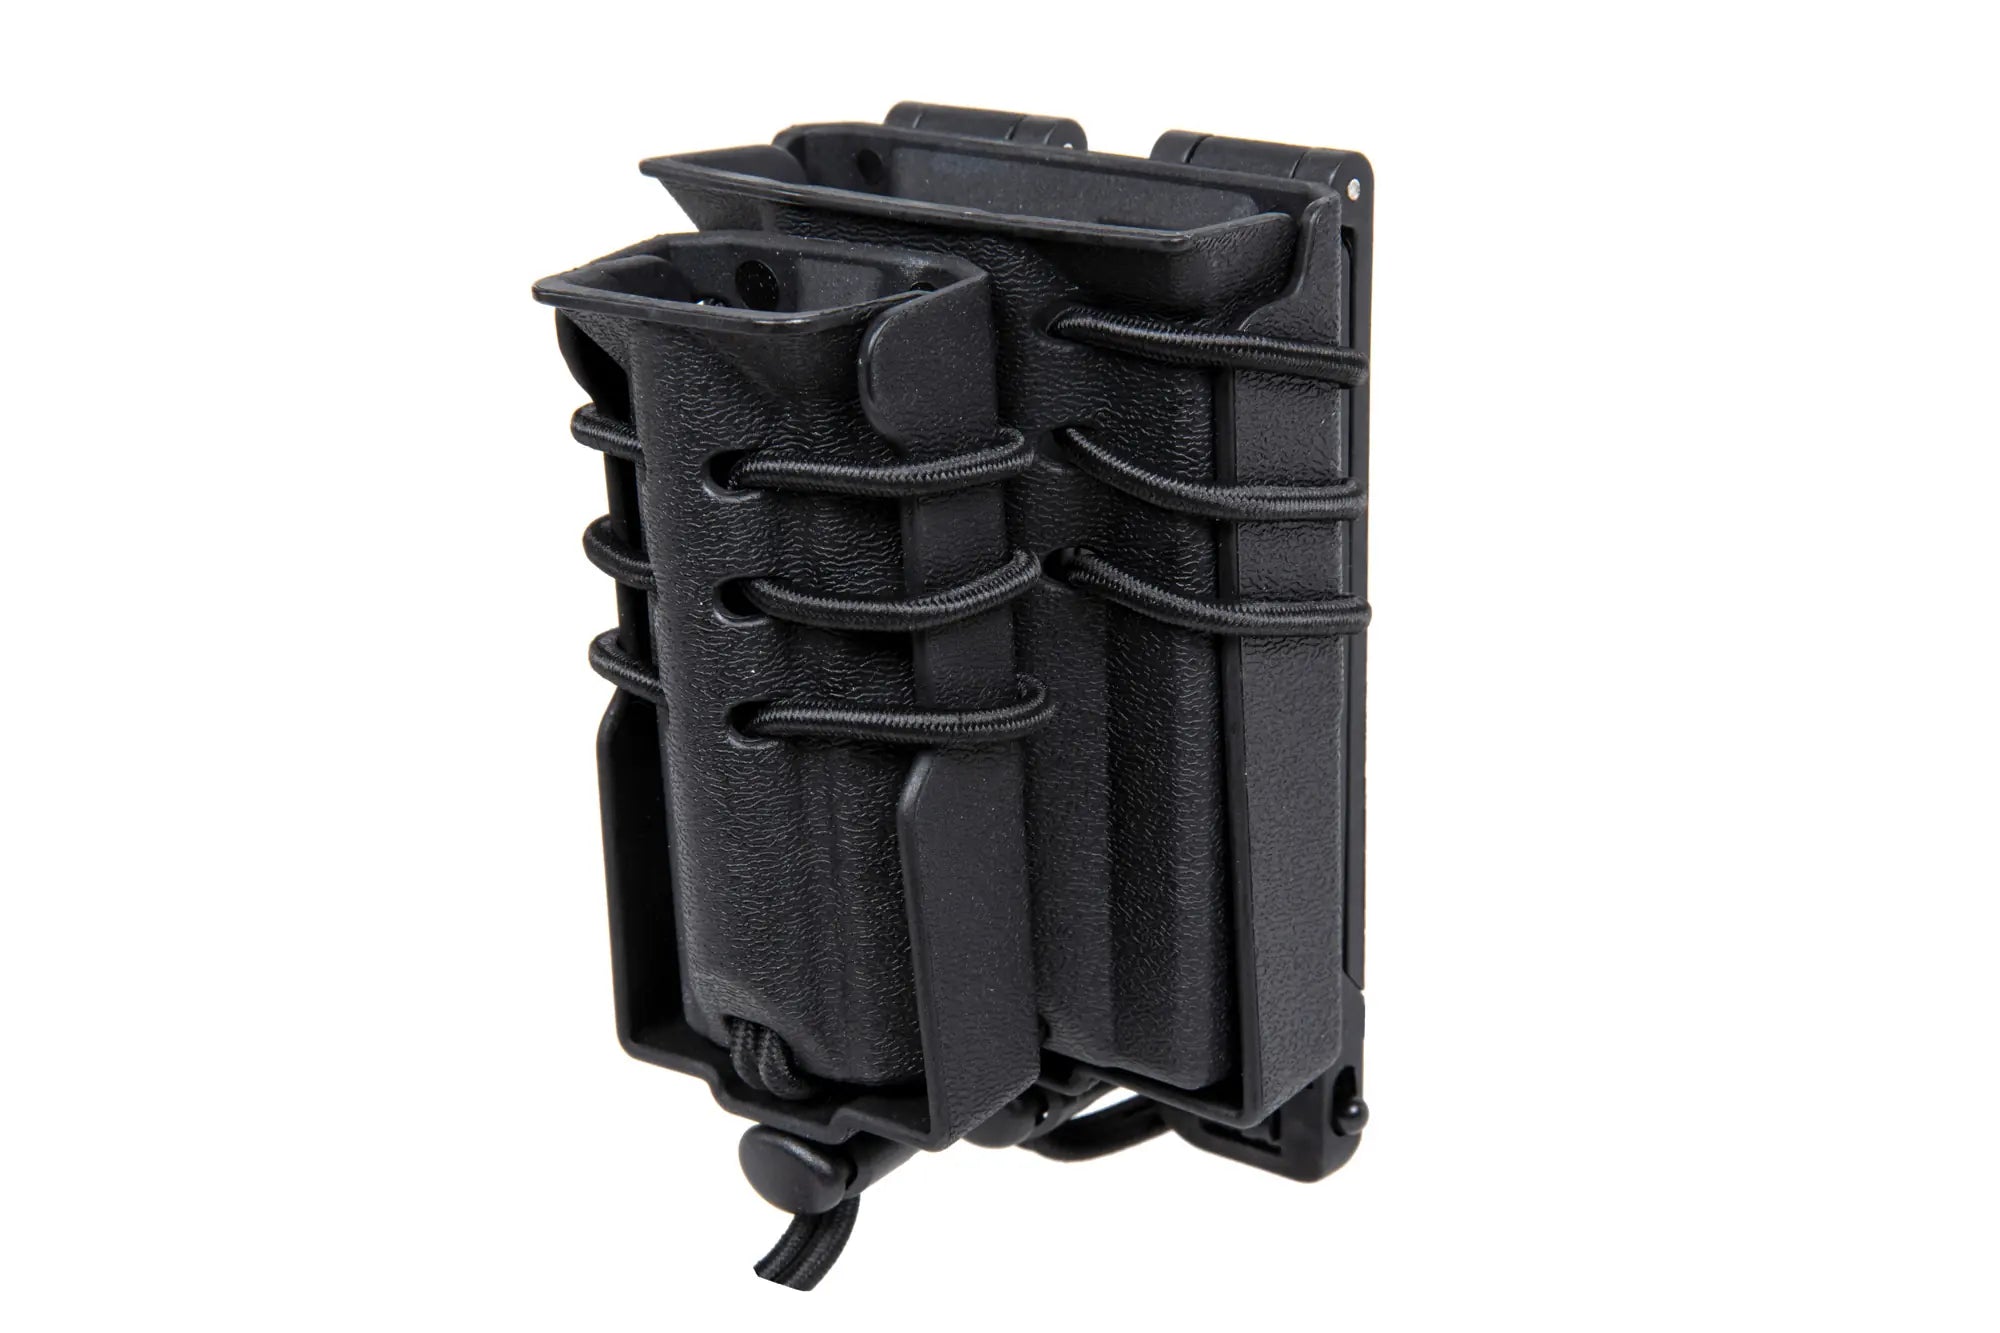 Carrier for 2 M4/M16 and 9mm magazines Wosport Urban Assault Quick Pull Black-2